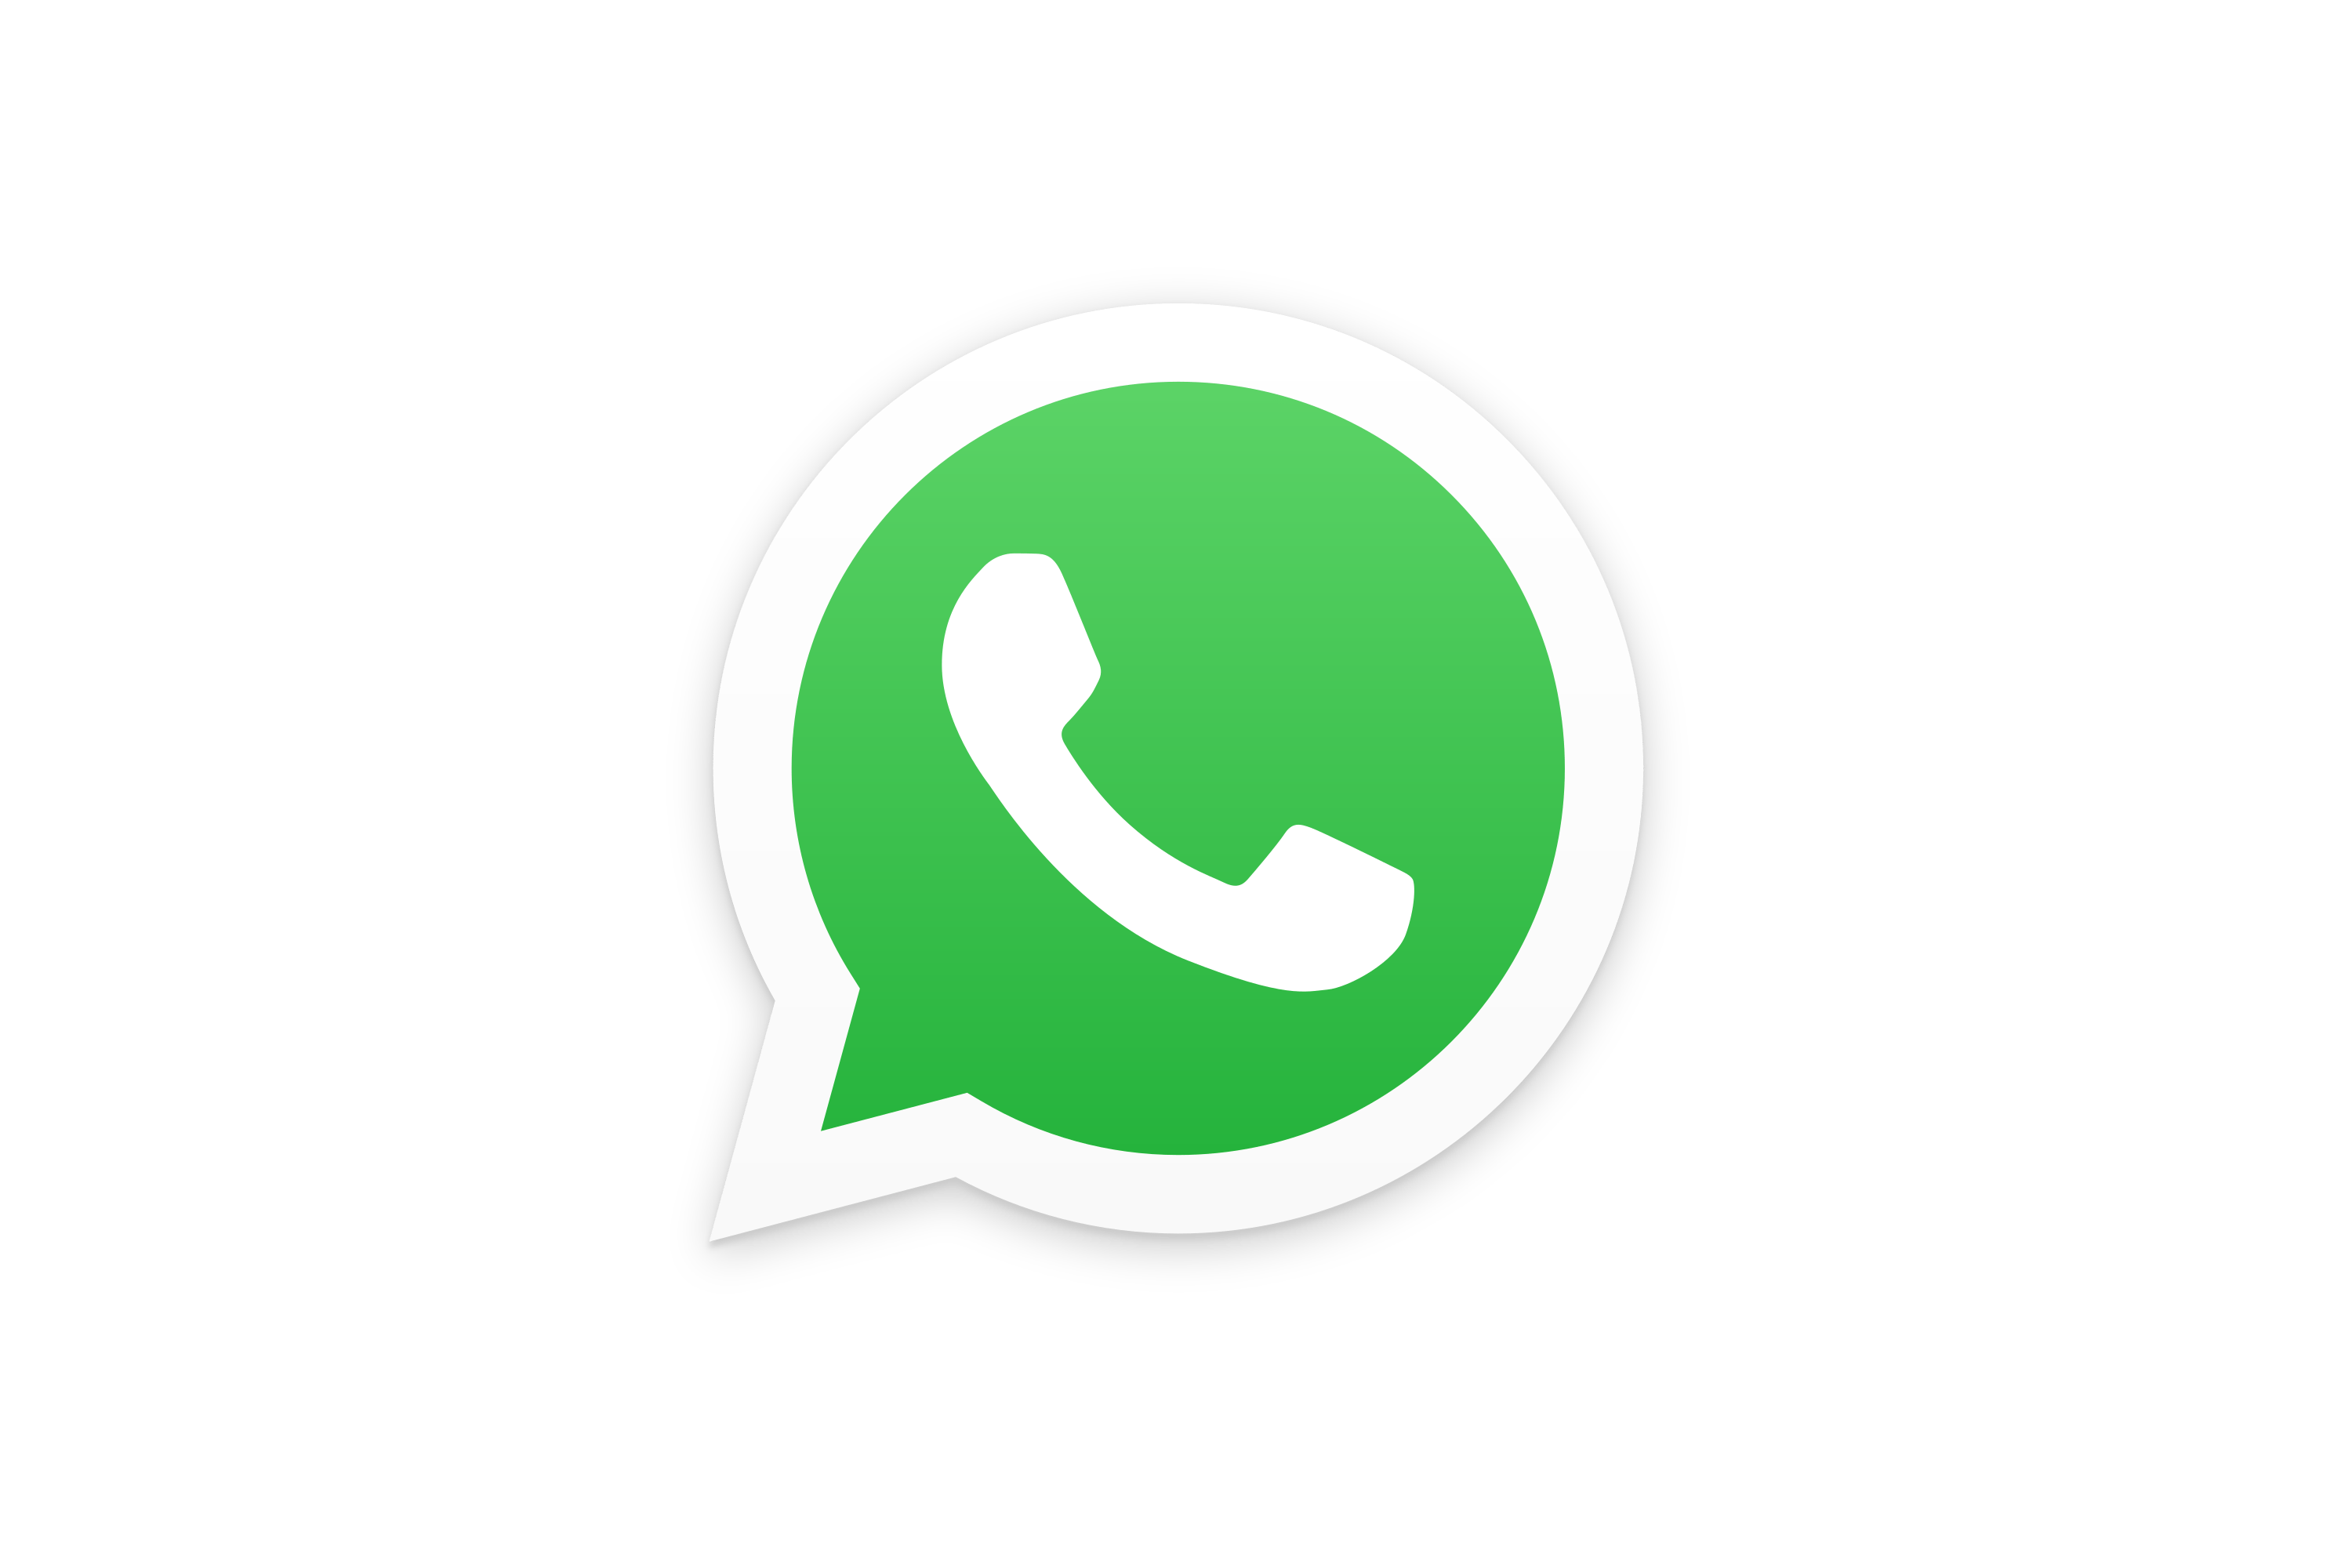  A green and white sticker with a phone receiver in a speech bubble on a green background.